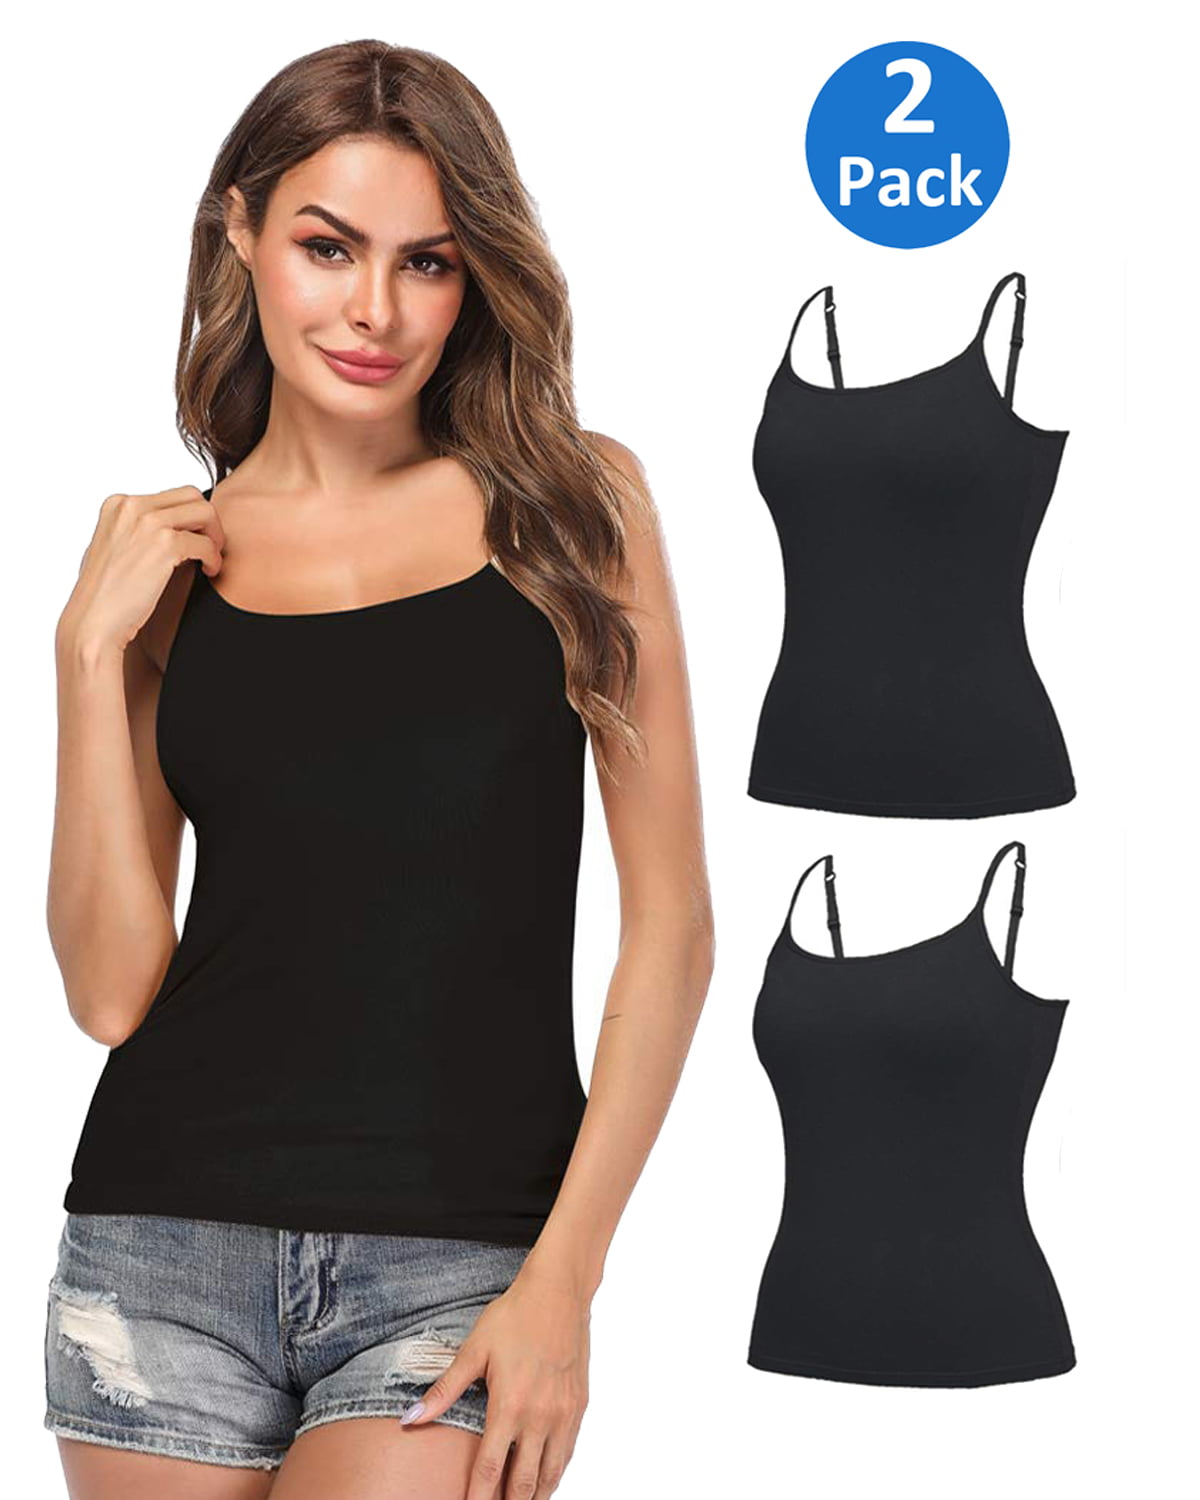 Womens Tank Tops Wide Strap Camisole with Built in Padded Bra Vest Sleeveless Top Shirt for Yoga Daily Wearing